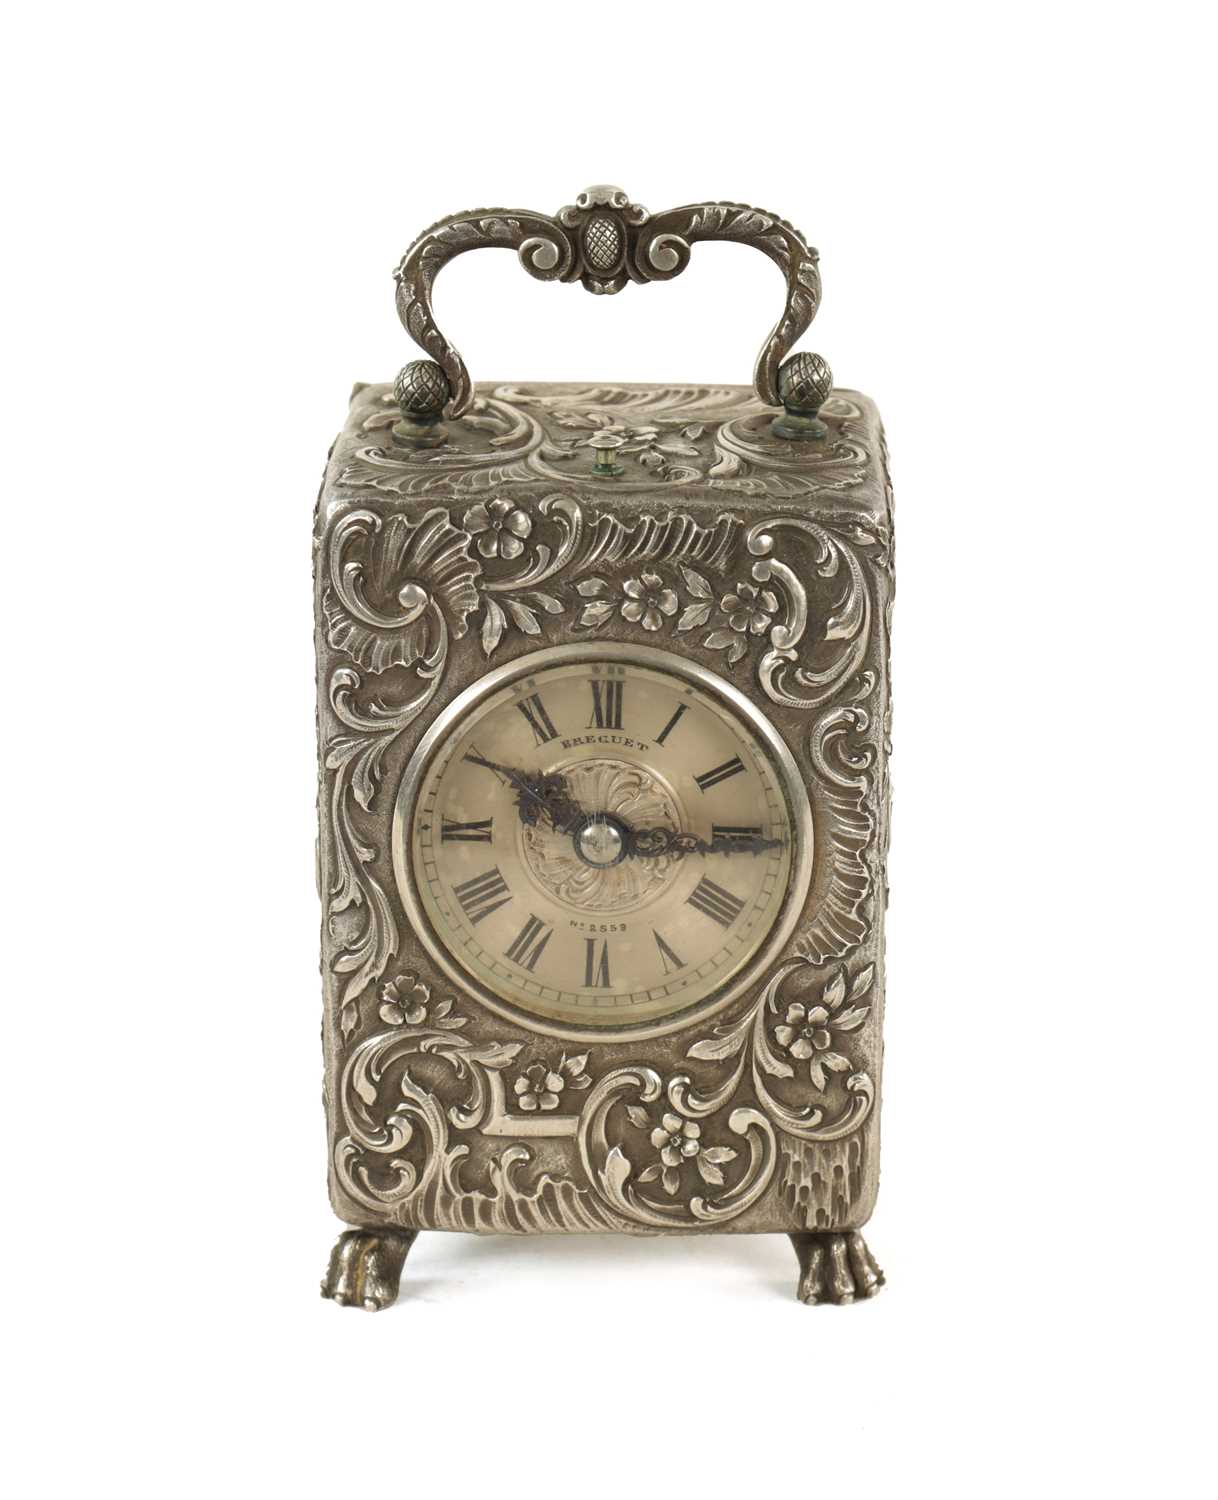 BREGUET, PARIS NO. 2559. A LATE 19TH CENTURY FRENCH SOLID SILVER REPEATING CARRIAGE CLOCK IN ORIGIN